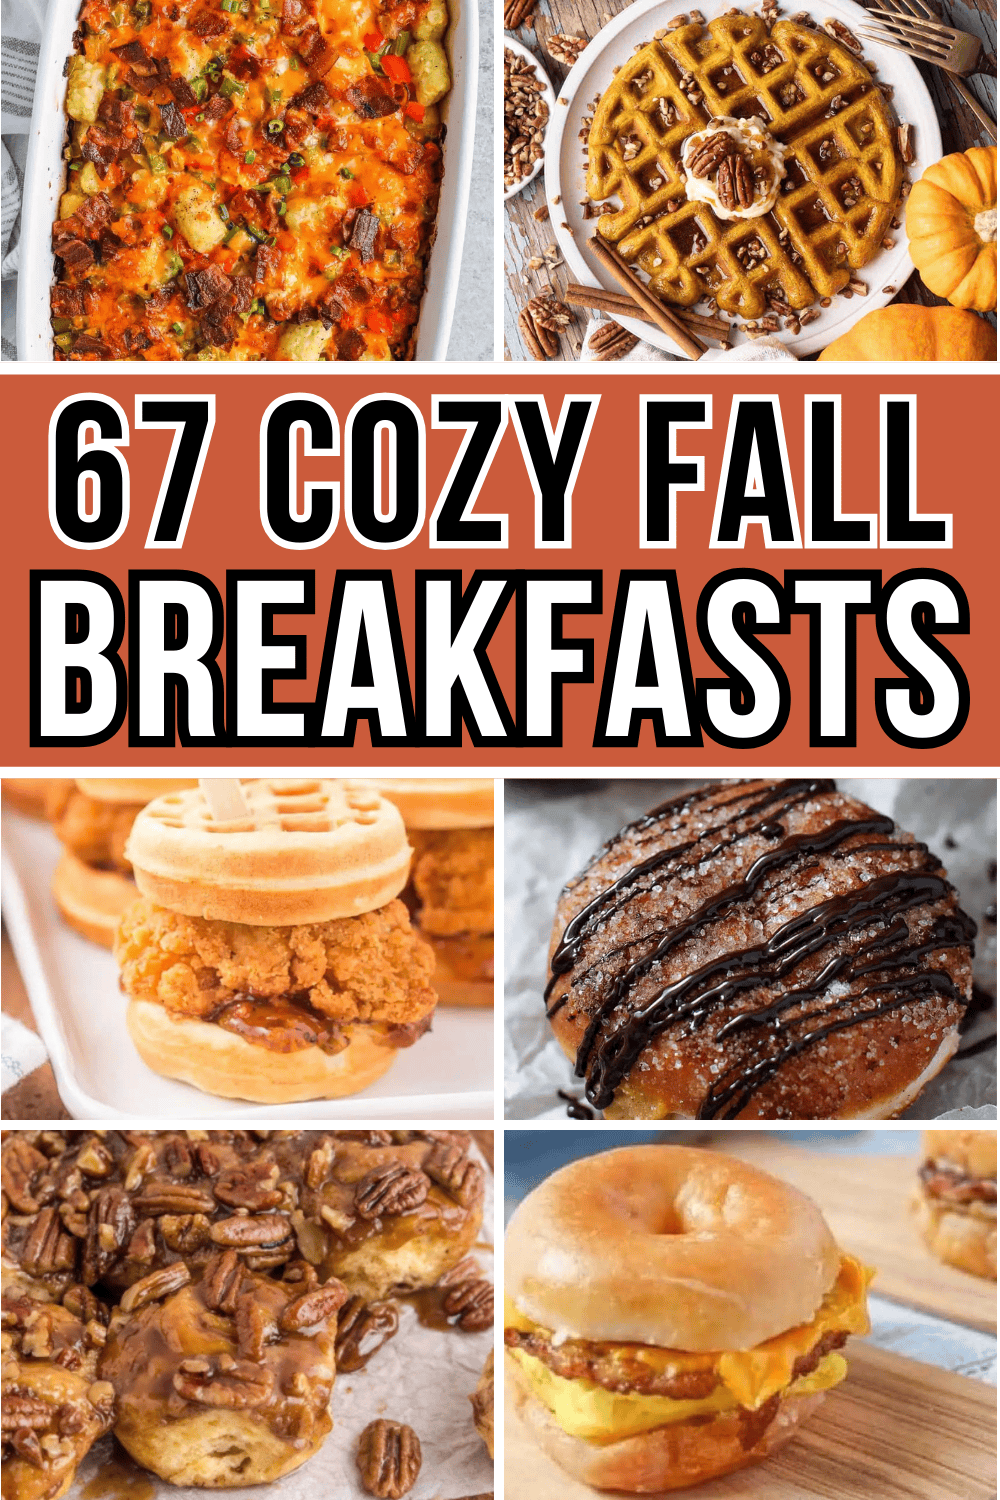 Easy fall breakfast ideas! Autumn brunch and fall breakfast recipes like savory make ahead casseroles, muffins, waffles, cute breakfast boards, treats and drinks. With apple and pumpkin flavor, they’re fun fall breakfast potluck ideas for a crowd or quick healthy meal prep. Fall breakfast aesthetic mornings, yummy fall breakfast casserole, fall breakfast charcuterie board, fall breakfast appetizers, fall breakfast board, fall recipes breakfast, fall breakfast vibes, fall breakfast menu ideas.